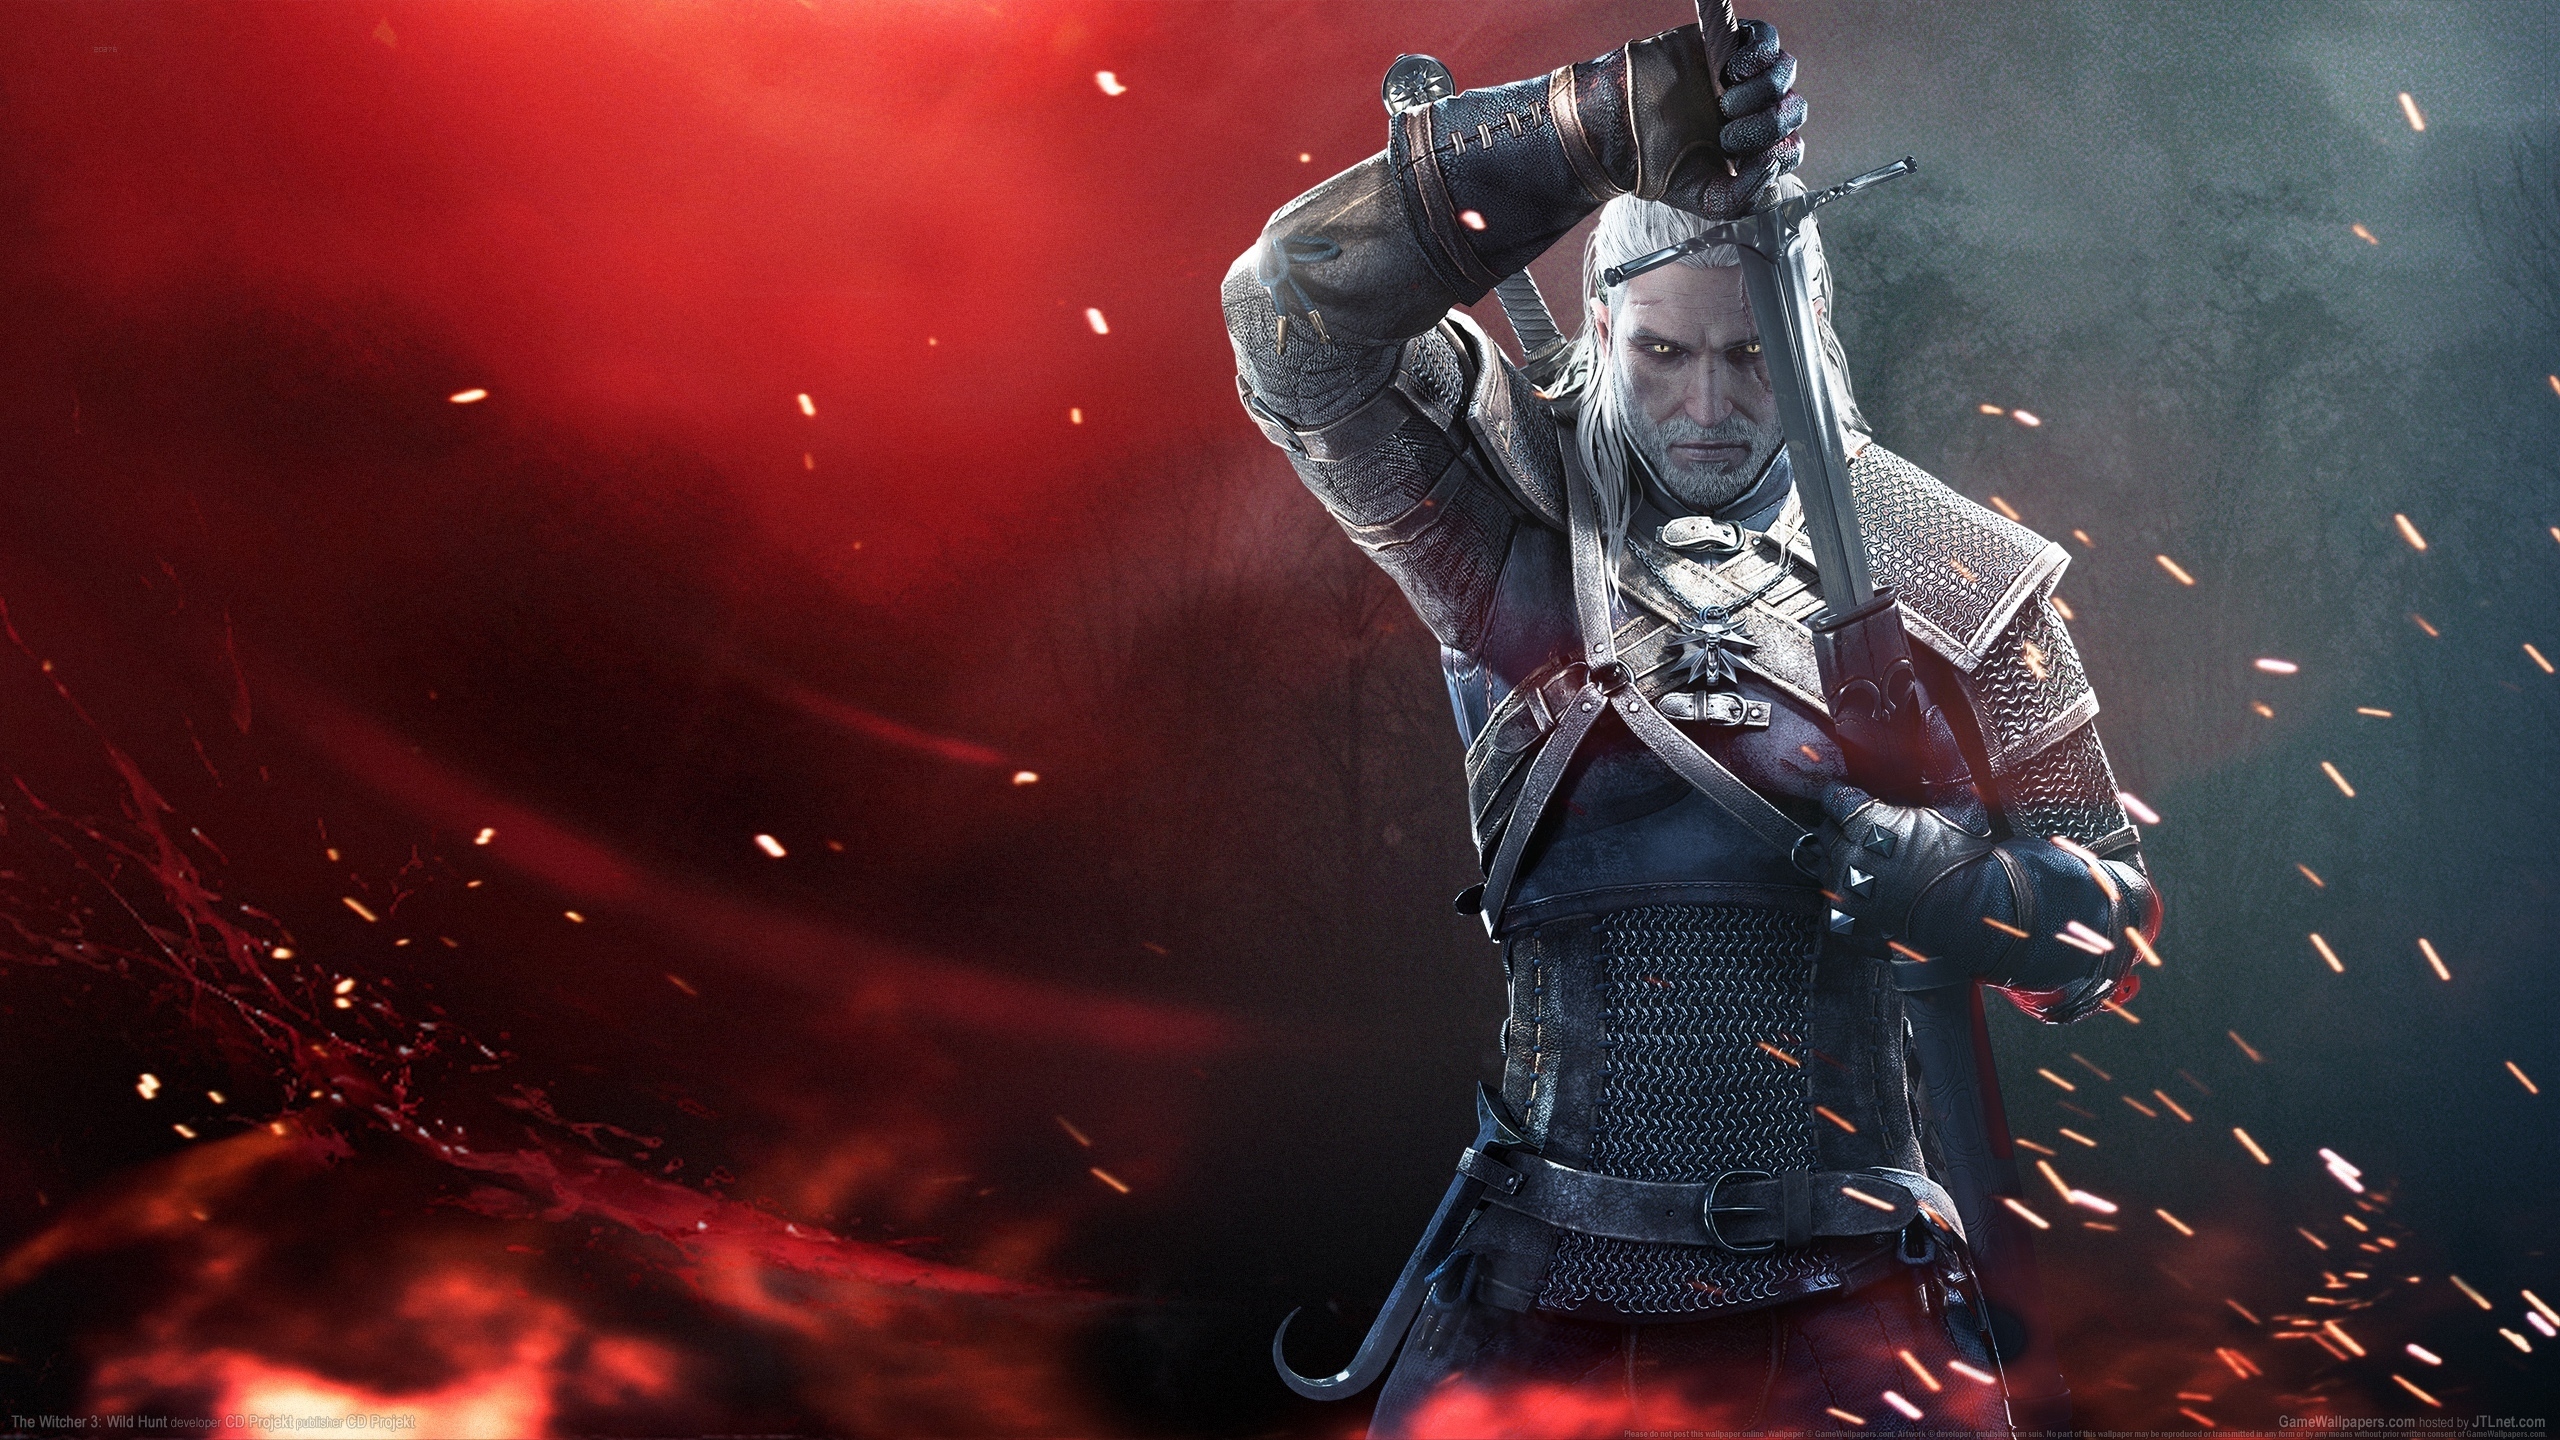 Free Nice Witcher 3 Images On Your Iphone - Witcher 3 - HD Wallpaper 